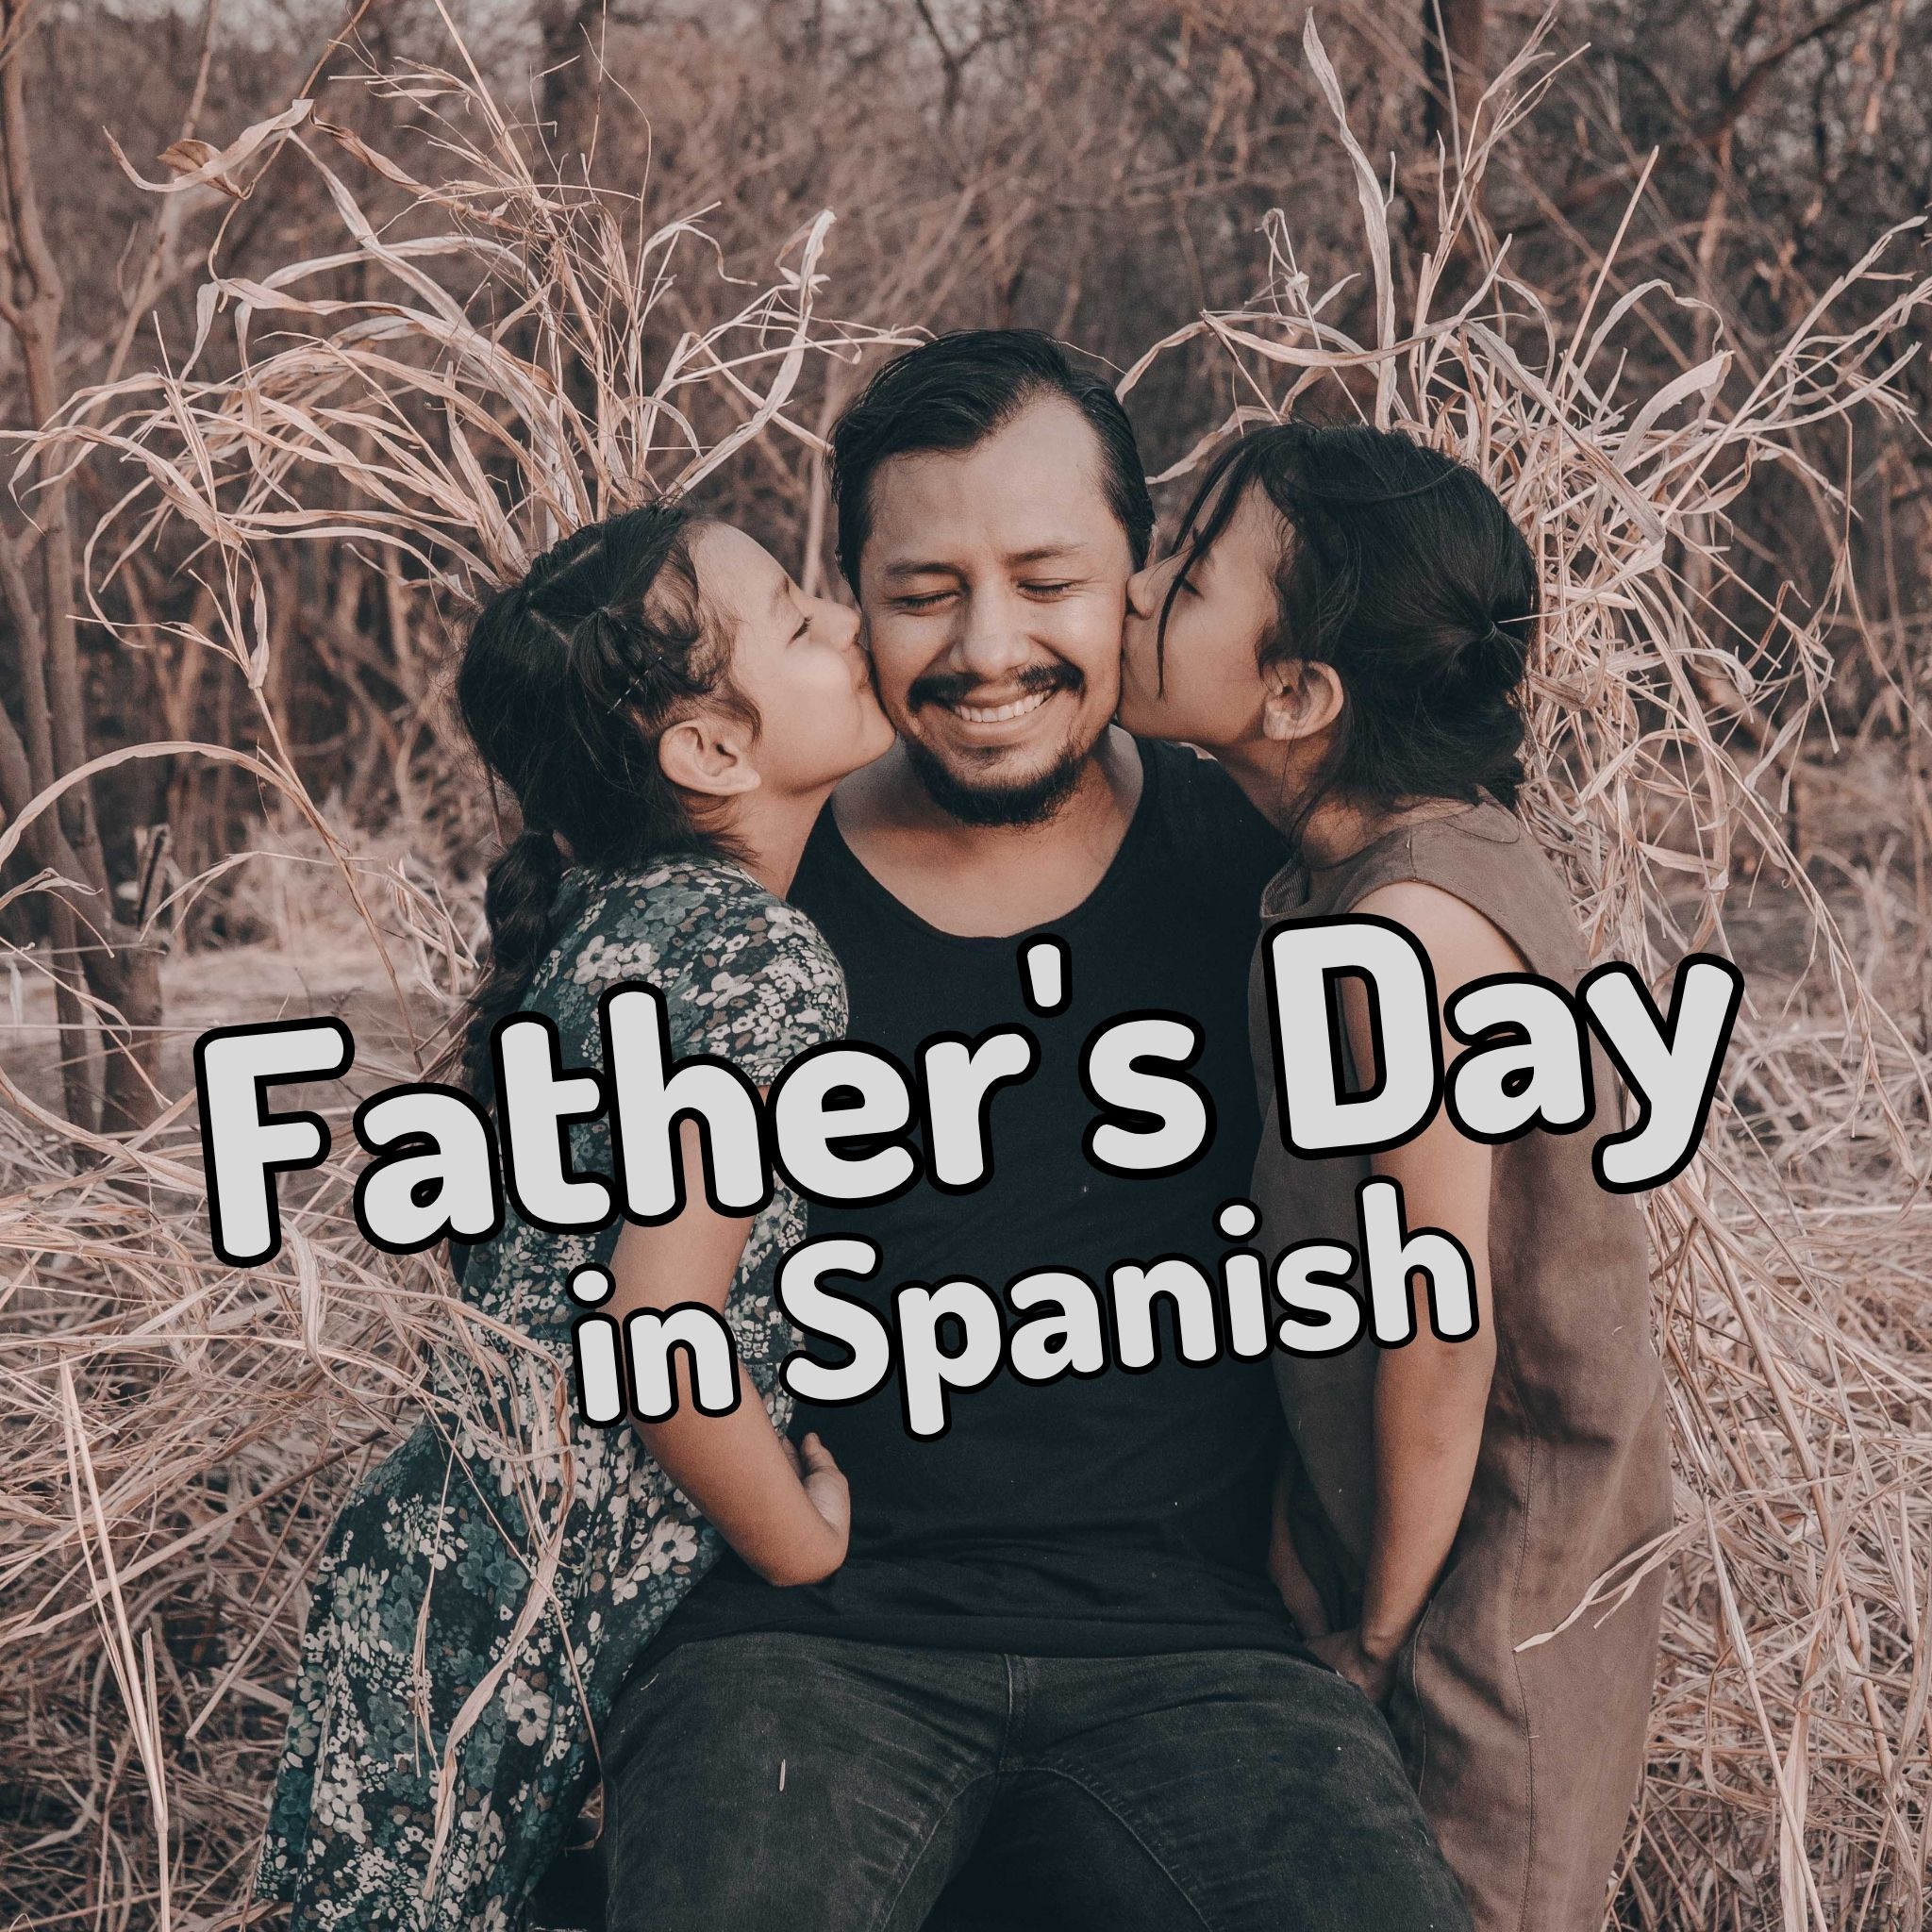 Happy Father’s Day in Spanish Essential phrases and vocab